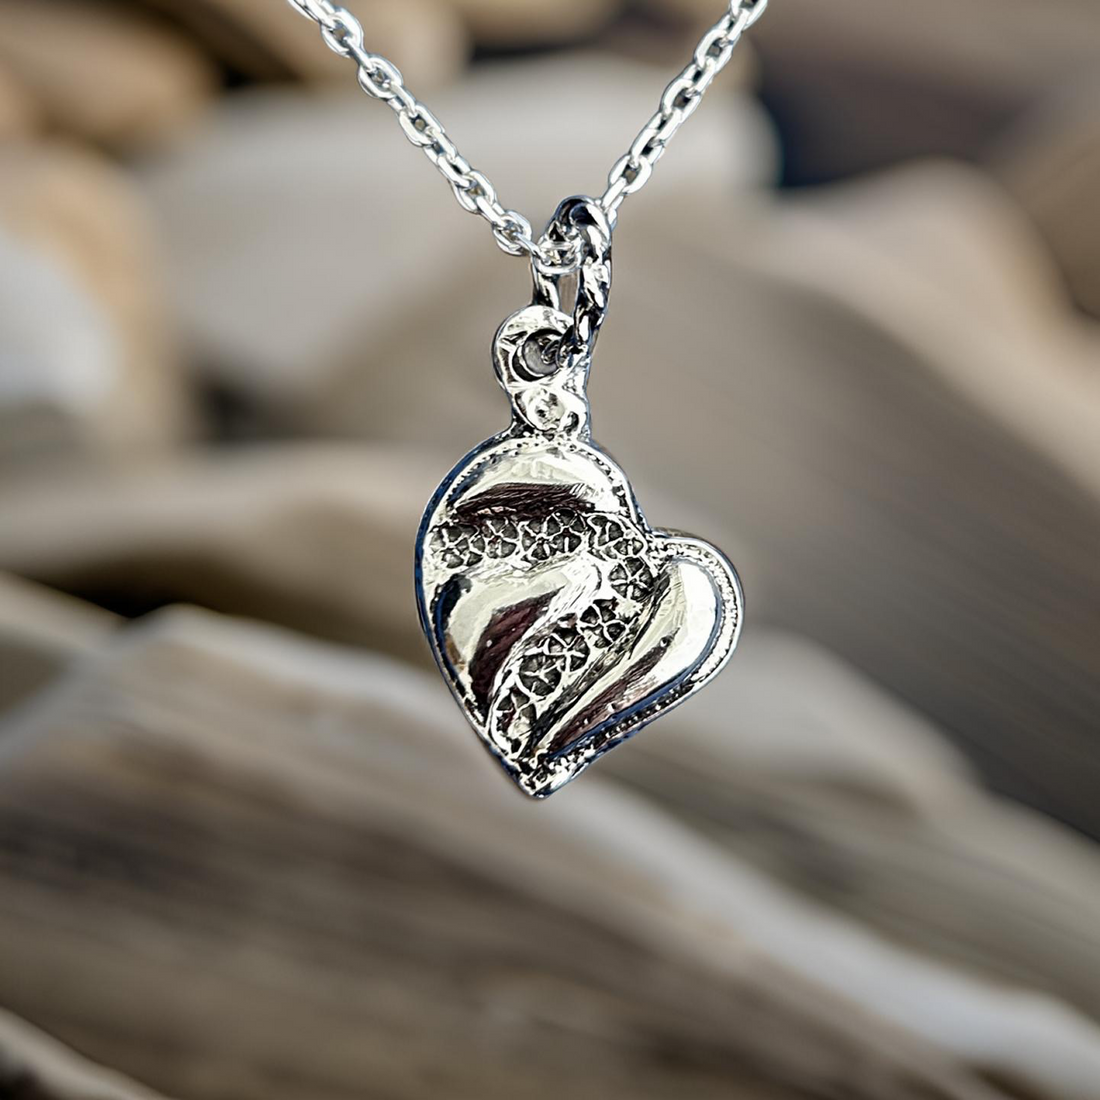 Heart Necklace with Flowers Design